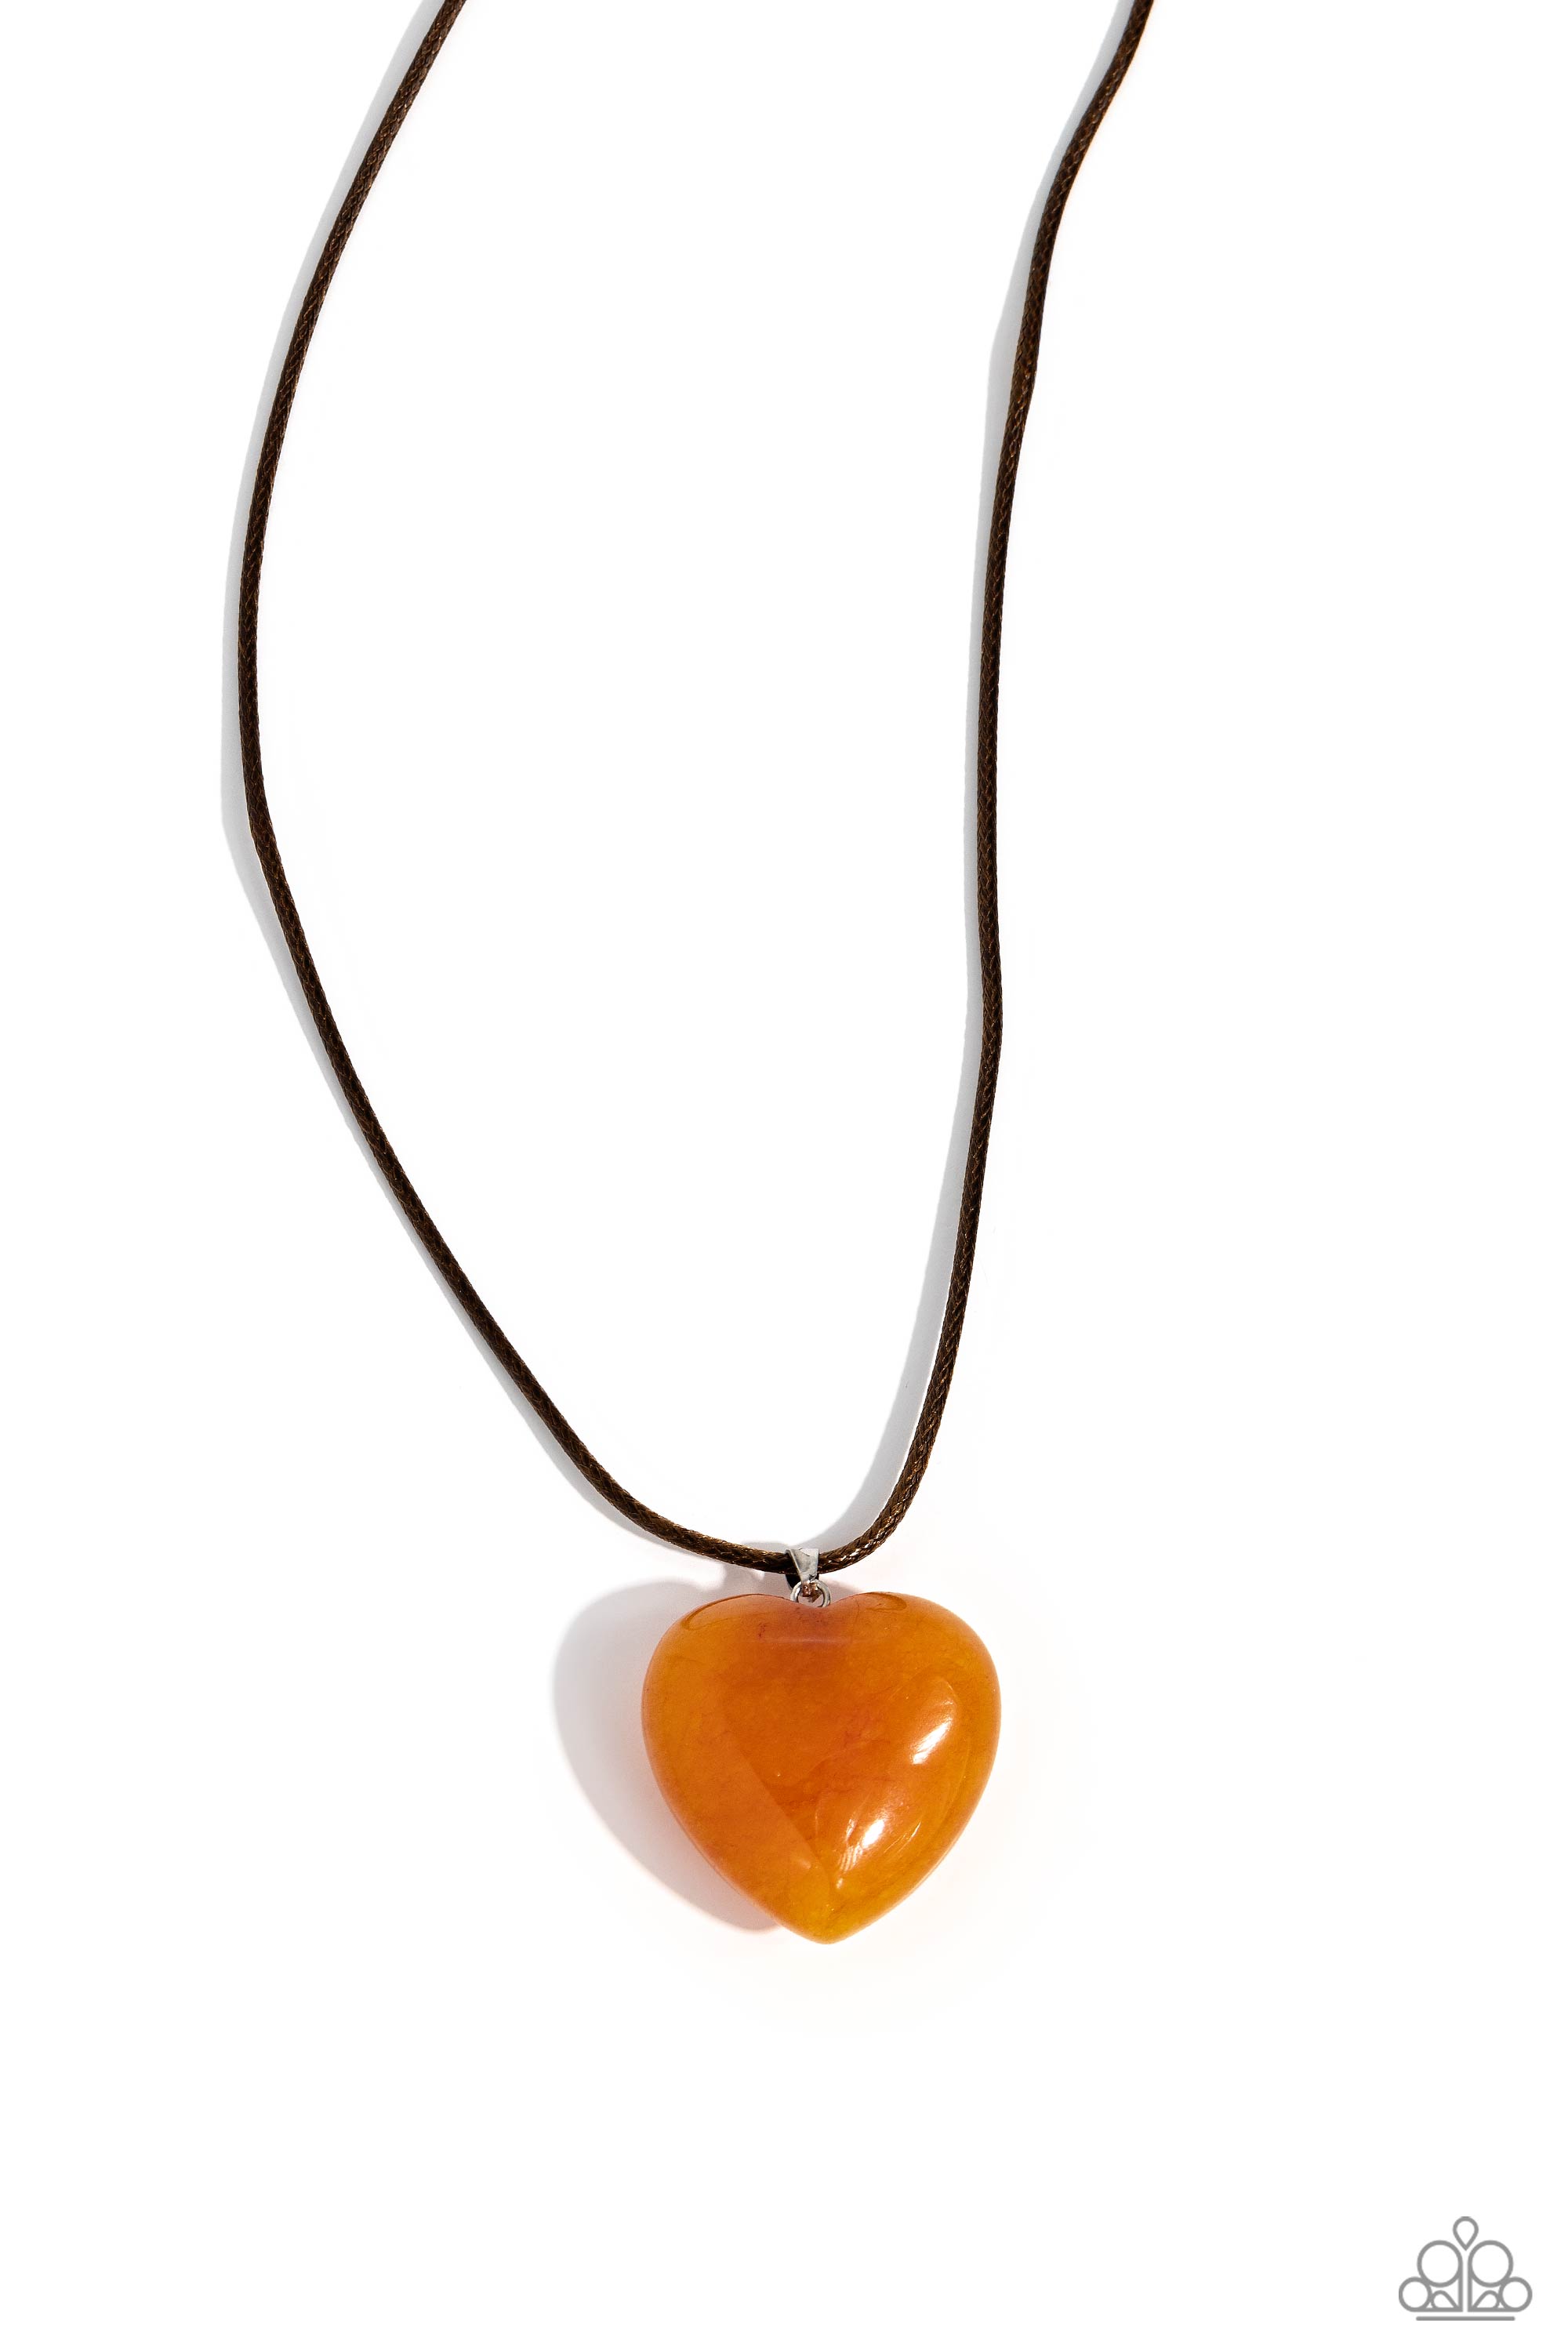 Serene Sweetheart Orange Stone Heart Necklace - Paparazzi Accessories- lightbox - CarasShop.com - $5 Jewelry by Cara Jewels